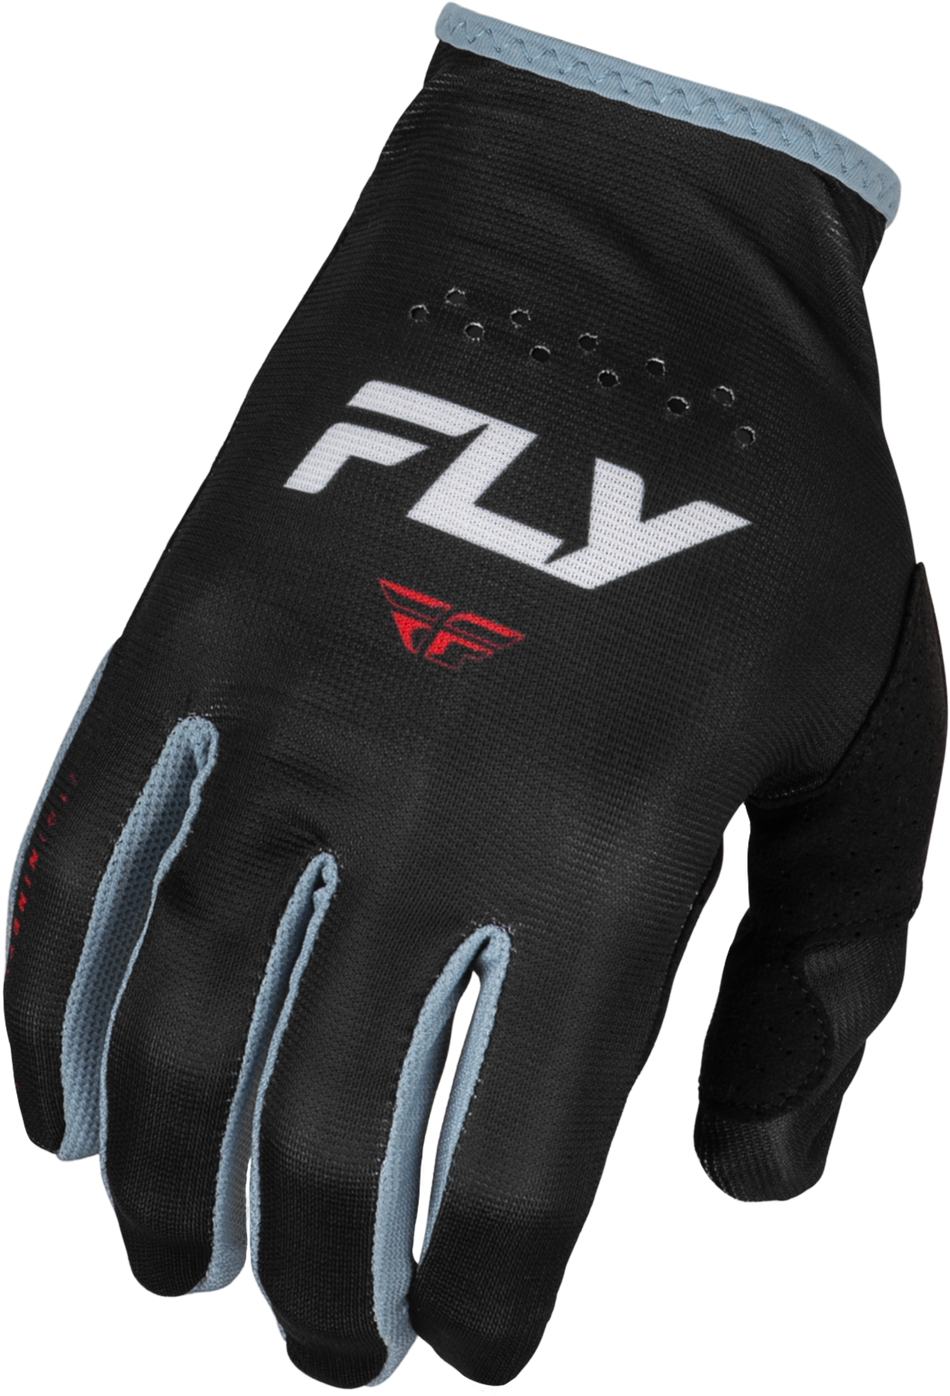 FLY RACING Lite Gloves Black/White/Red 2x 377-7102X